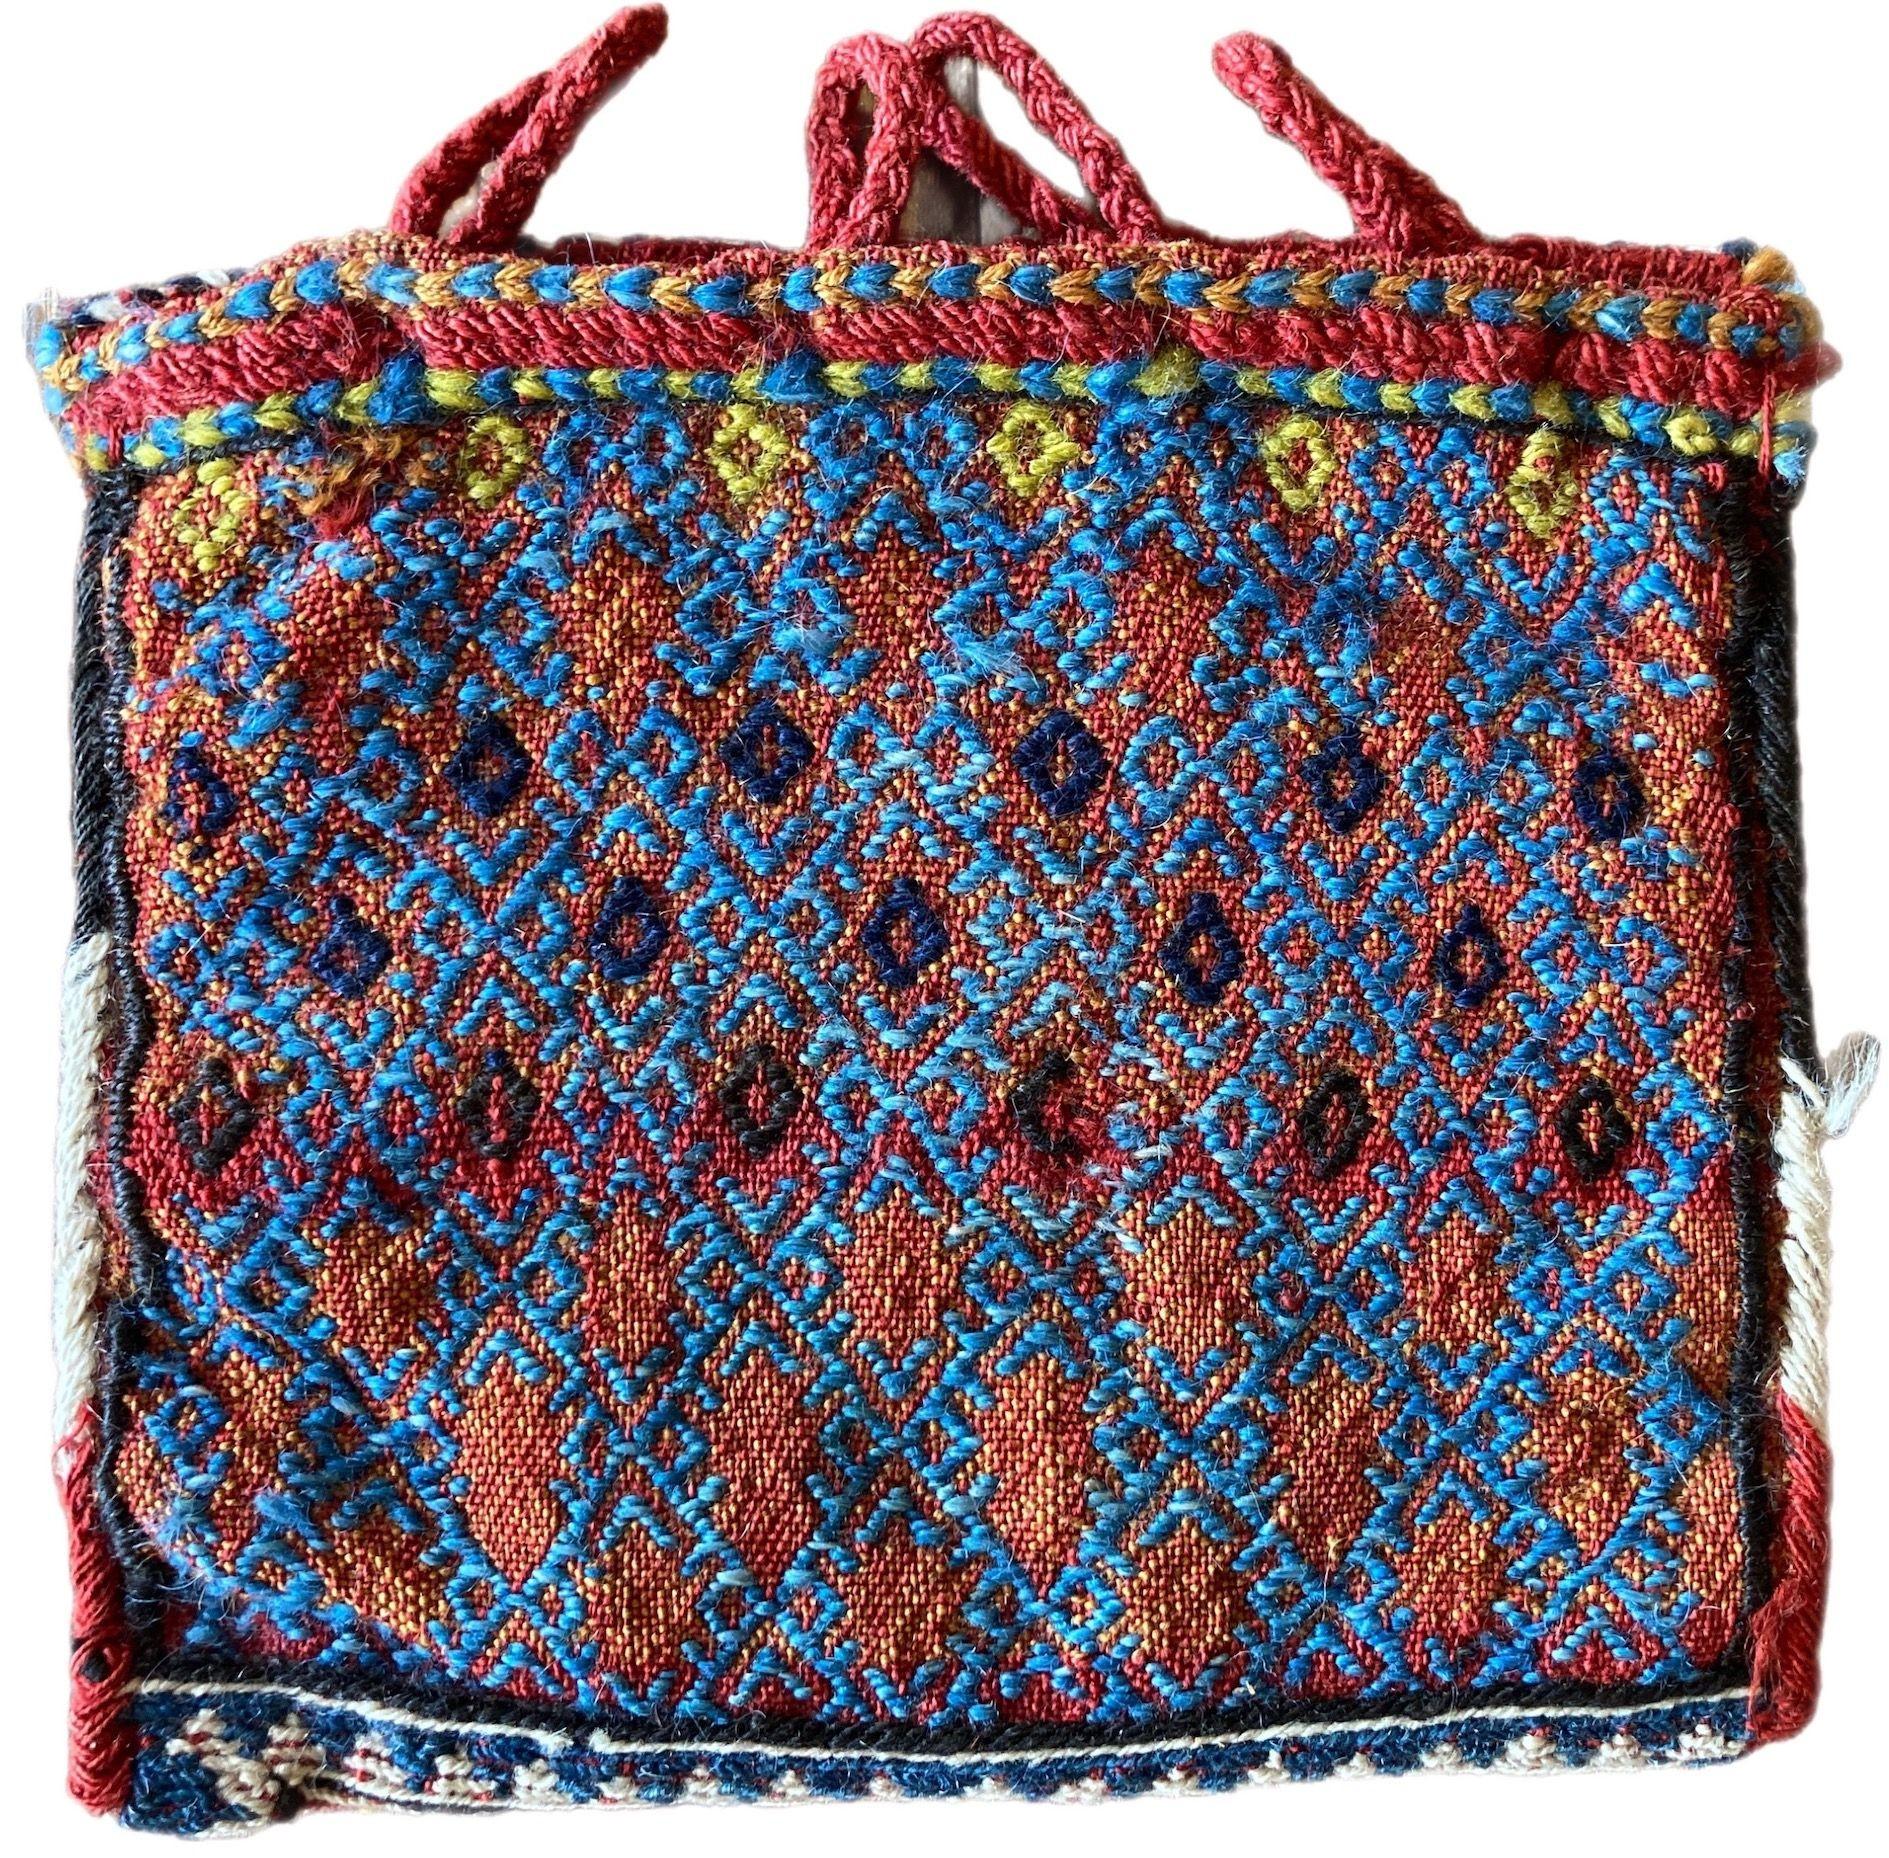 A lovely antique Chanteh woven by the nomadic Bakhtiari tribe circa 1880 with a Soumakh weave on both sides. The design features an allover lattice in golds and reds on one side and blues and reds on the other. These small vanity bags were woven by